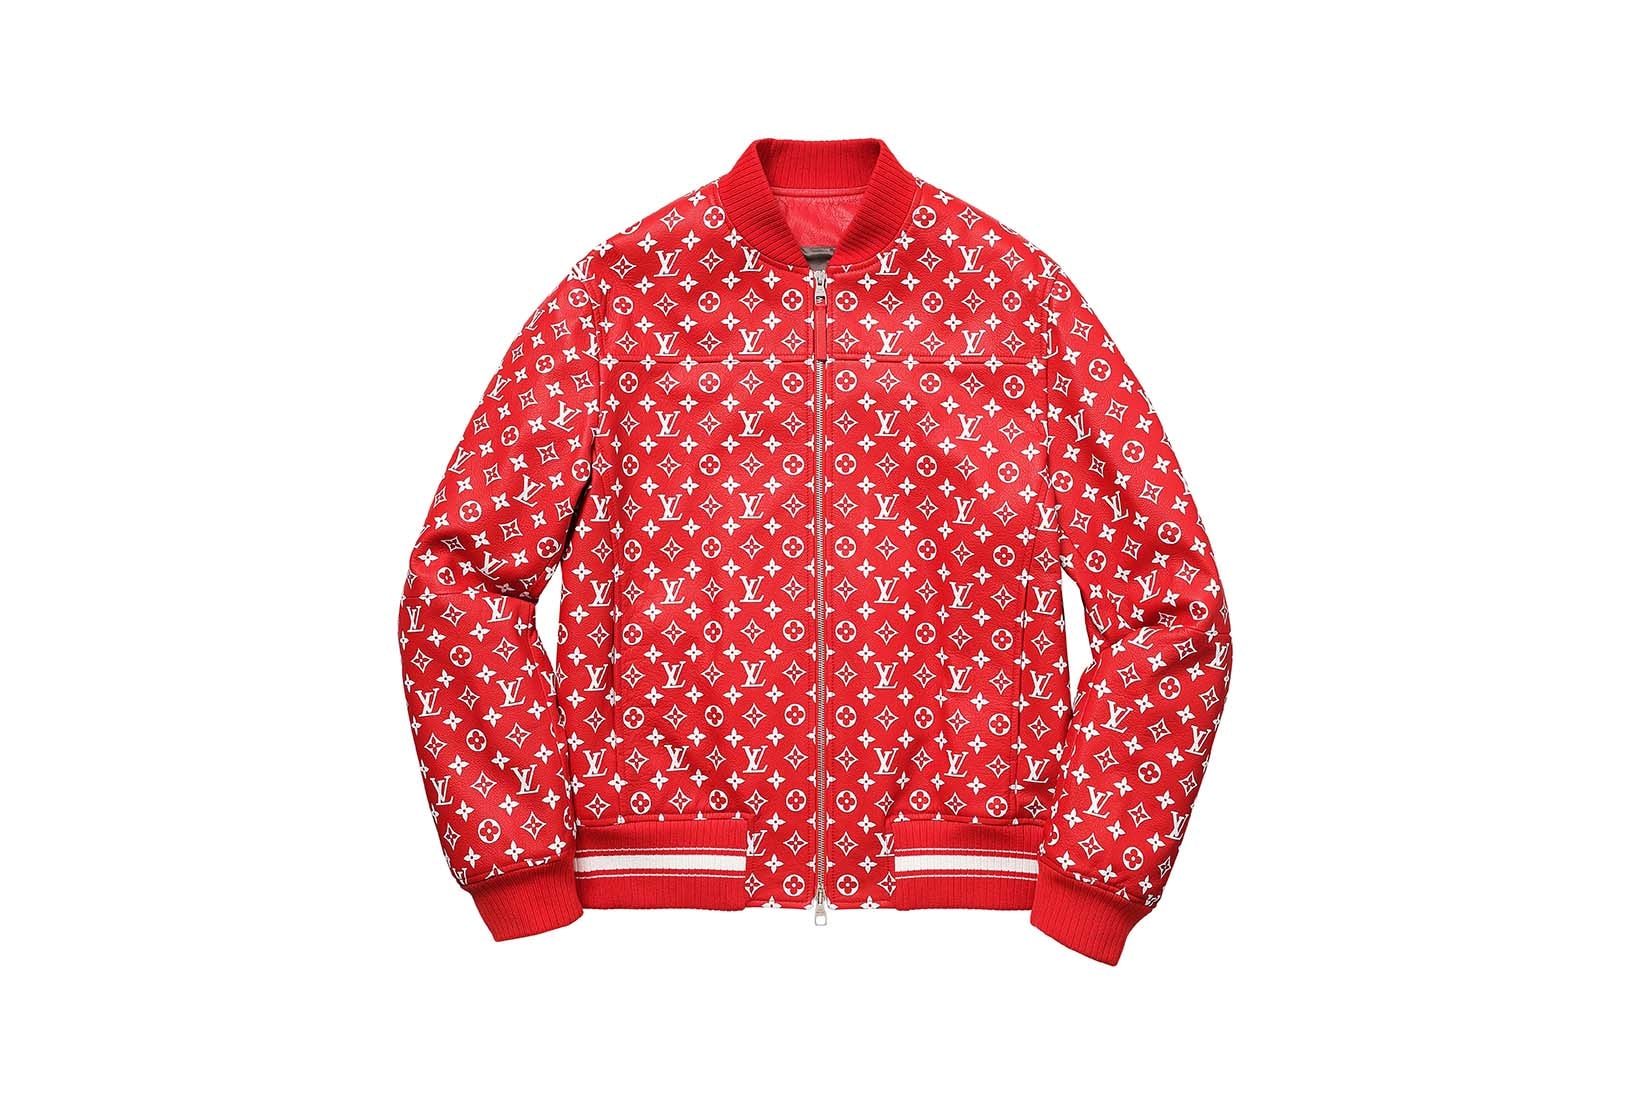 All Pieces From Supreme x Louis Vuitton